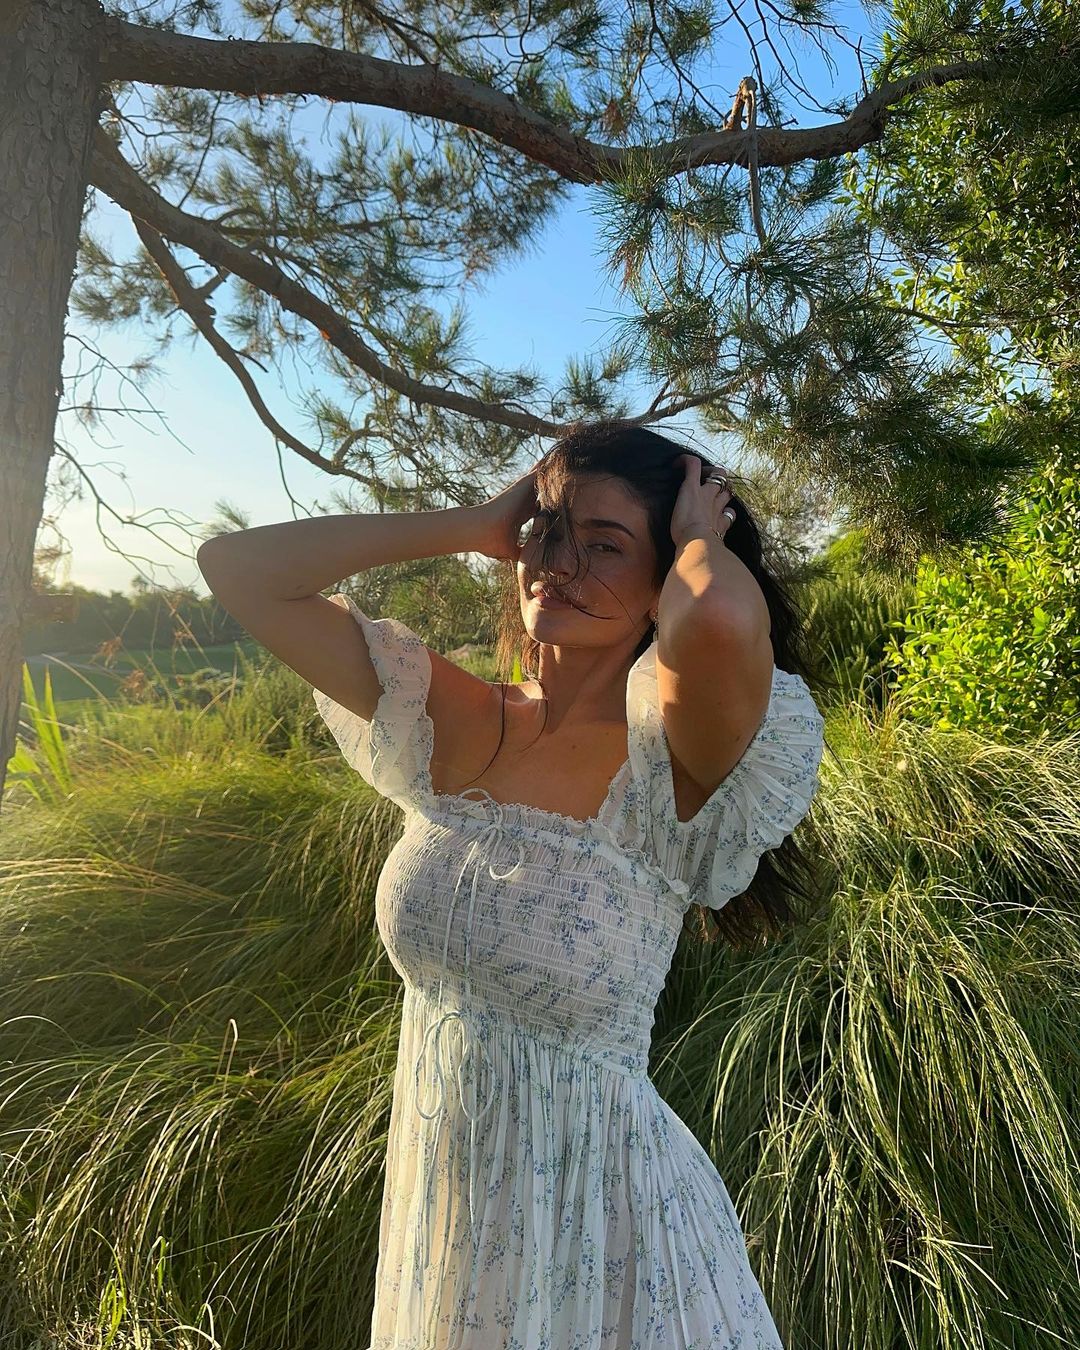 Kylie Jenner takes a more ethereal approach to her Instagram